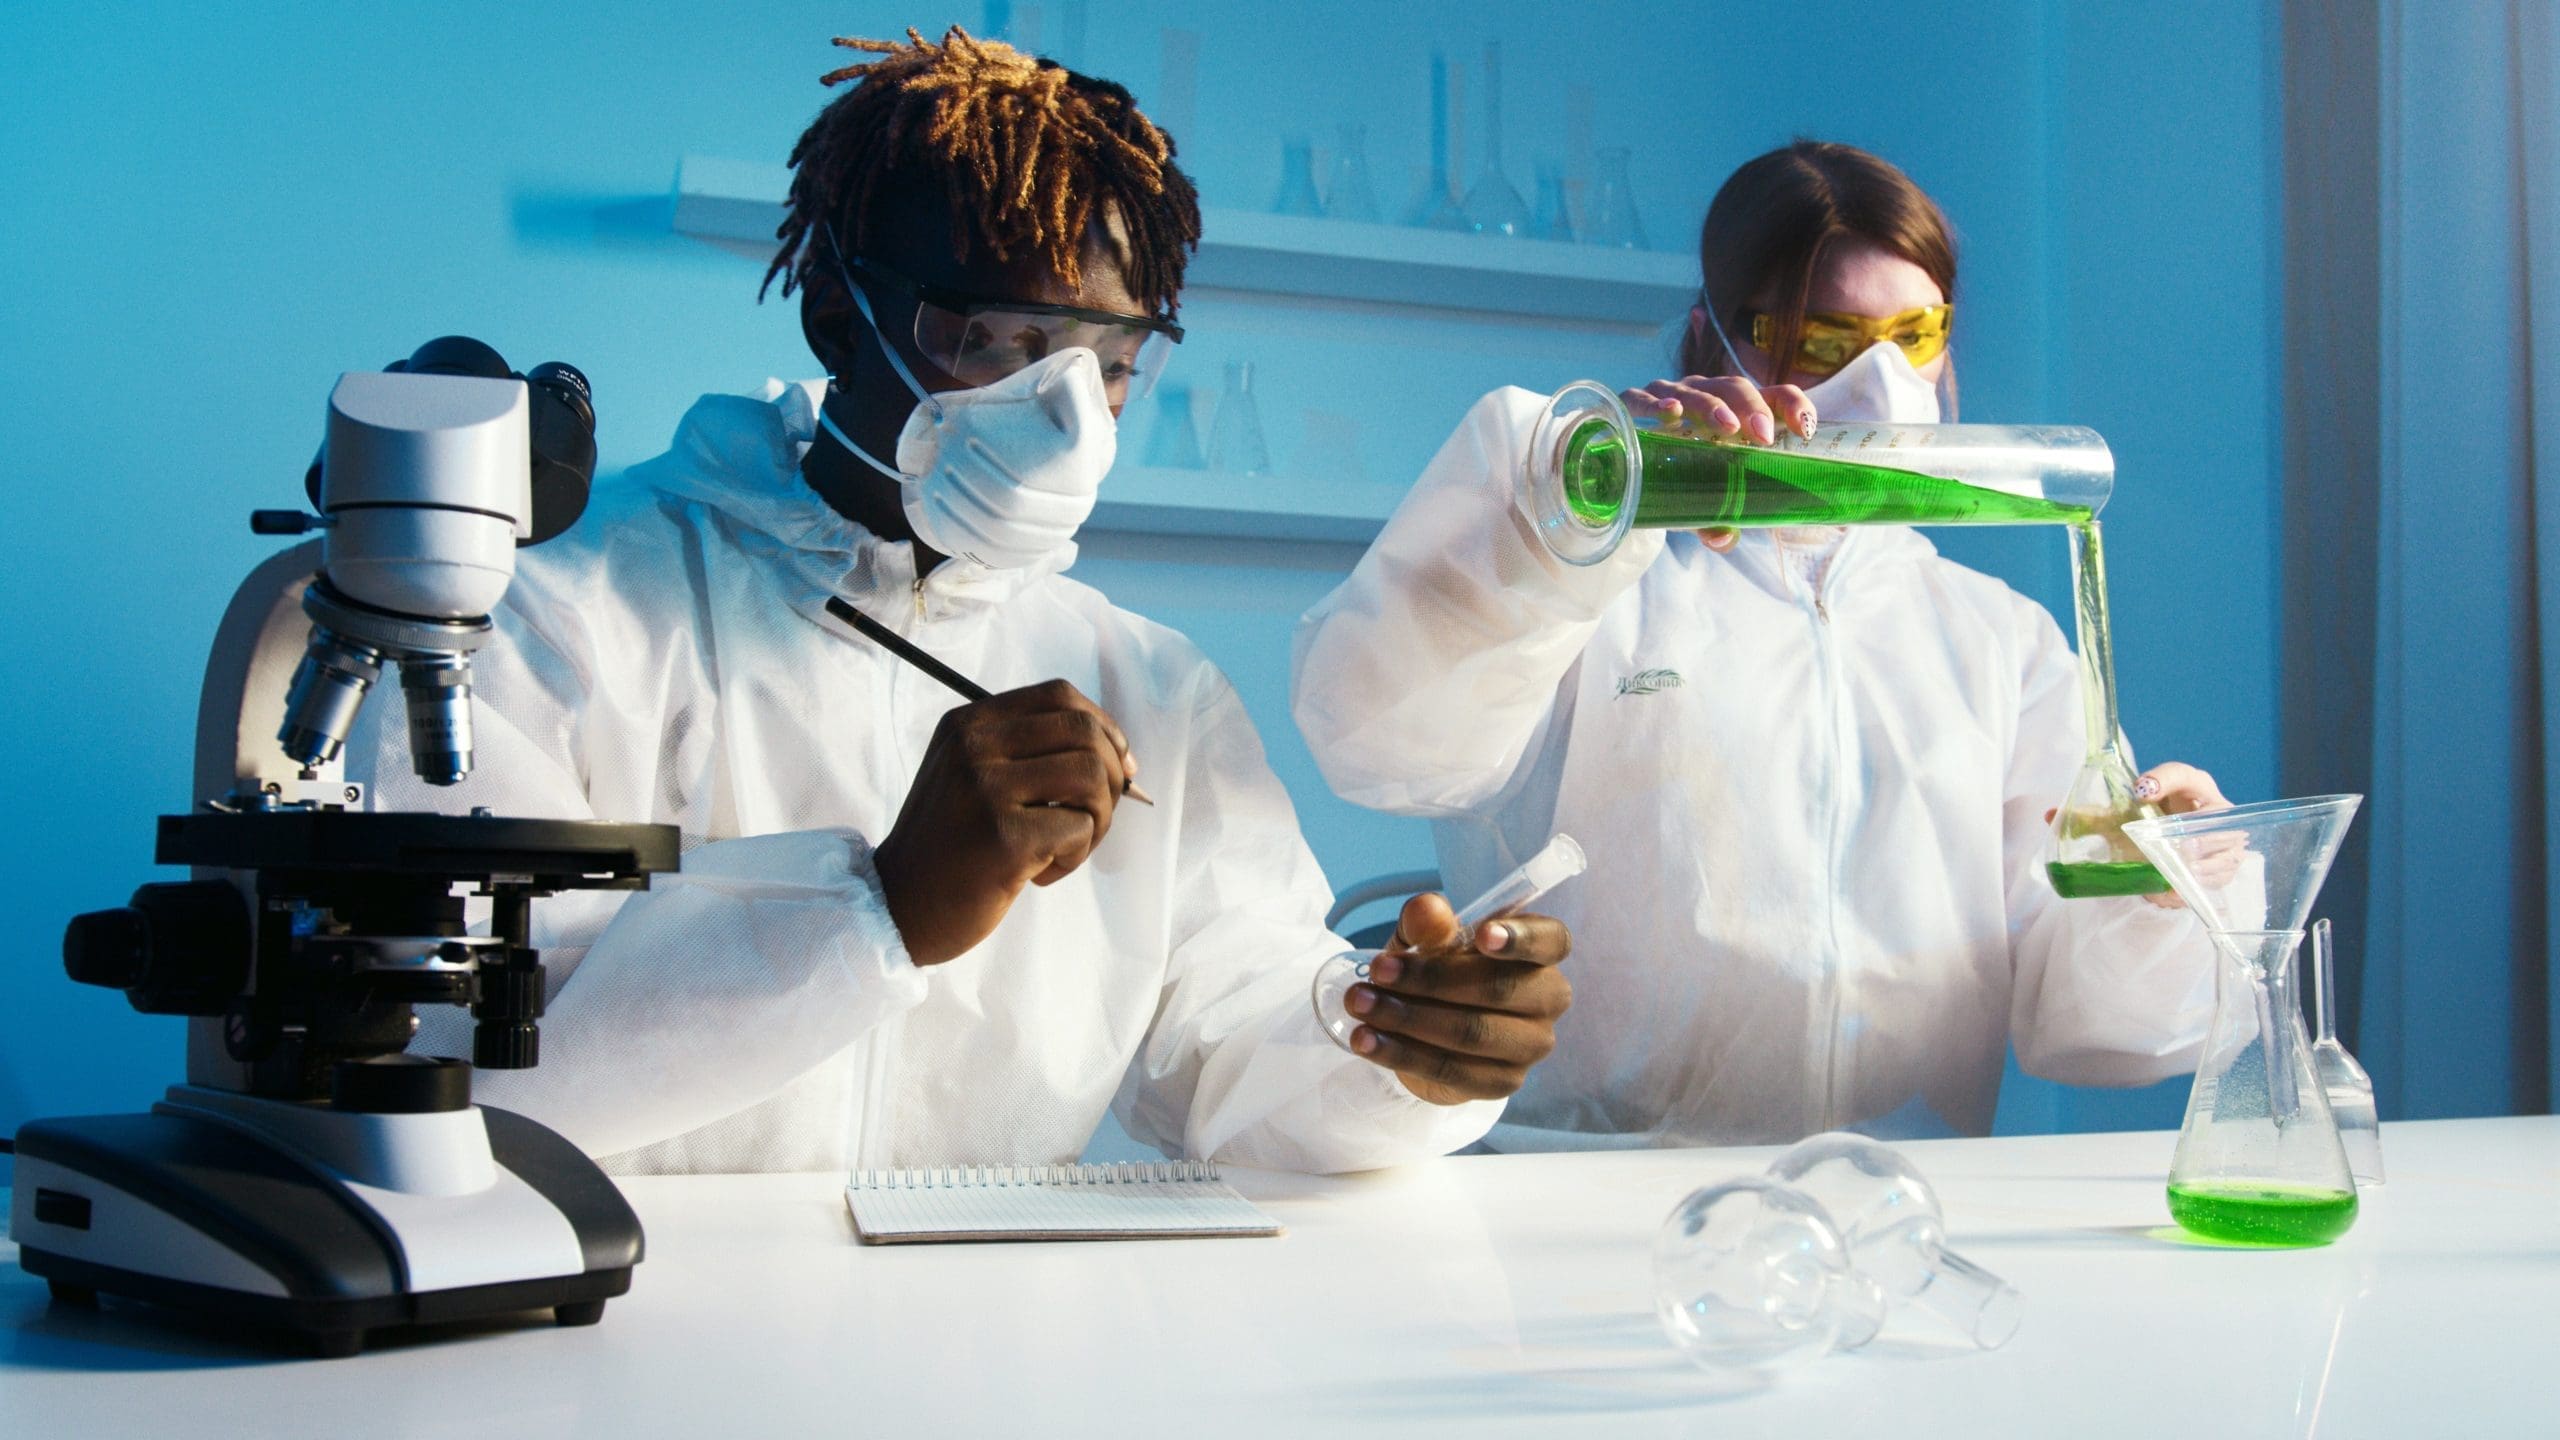 Featured image for “AmeriCorps members to help fight pandemic”